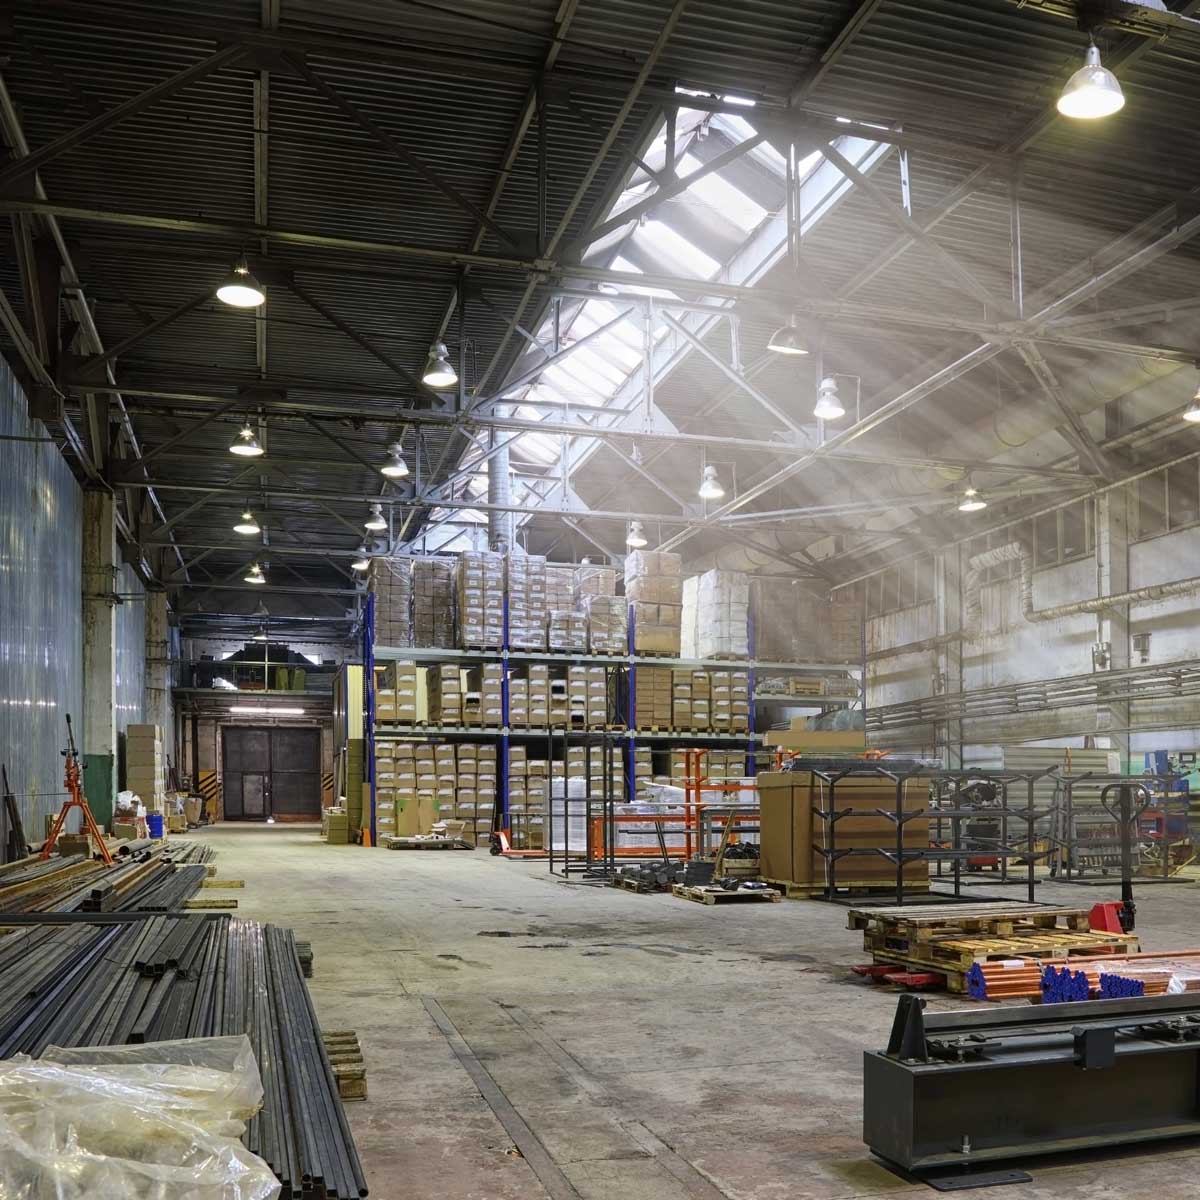 An empty production warehouse and industrial workshop